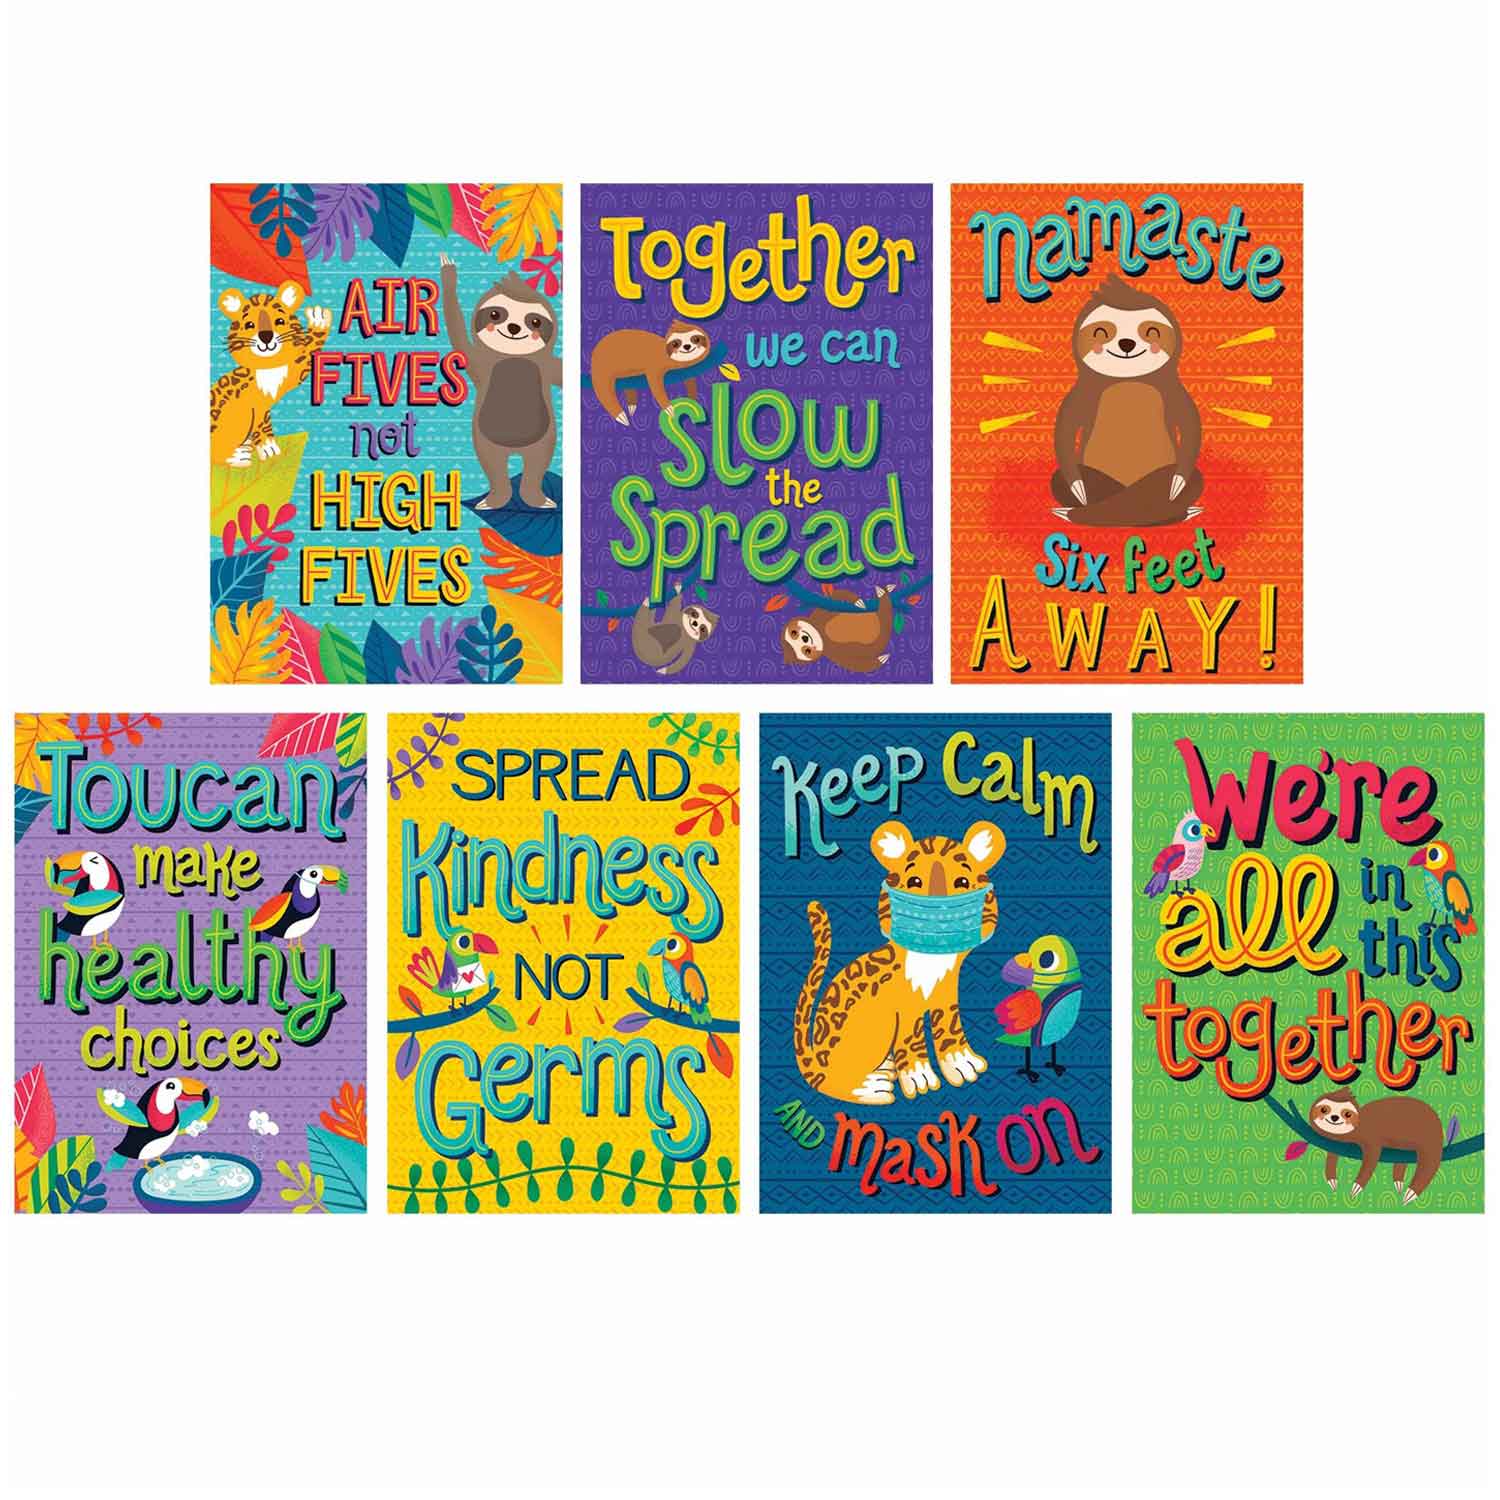 One World Happy & Healthy Poster Set